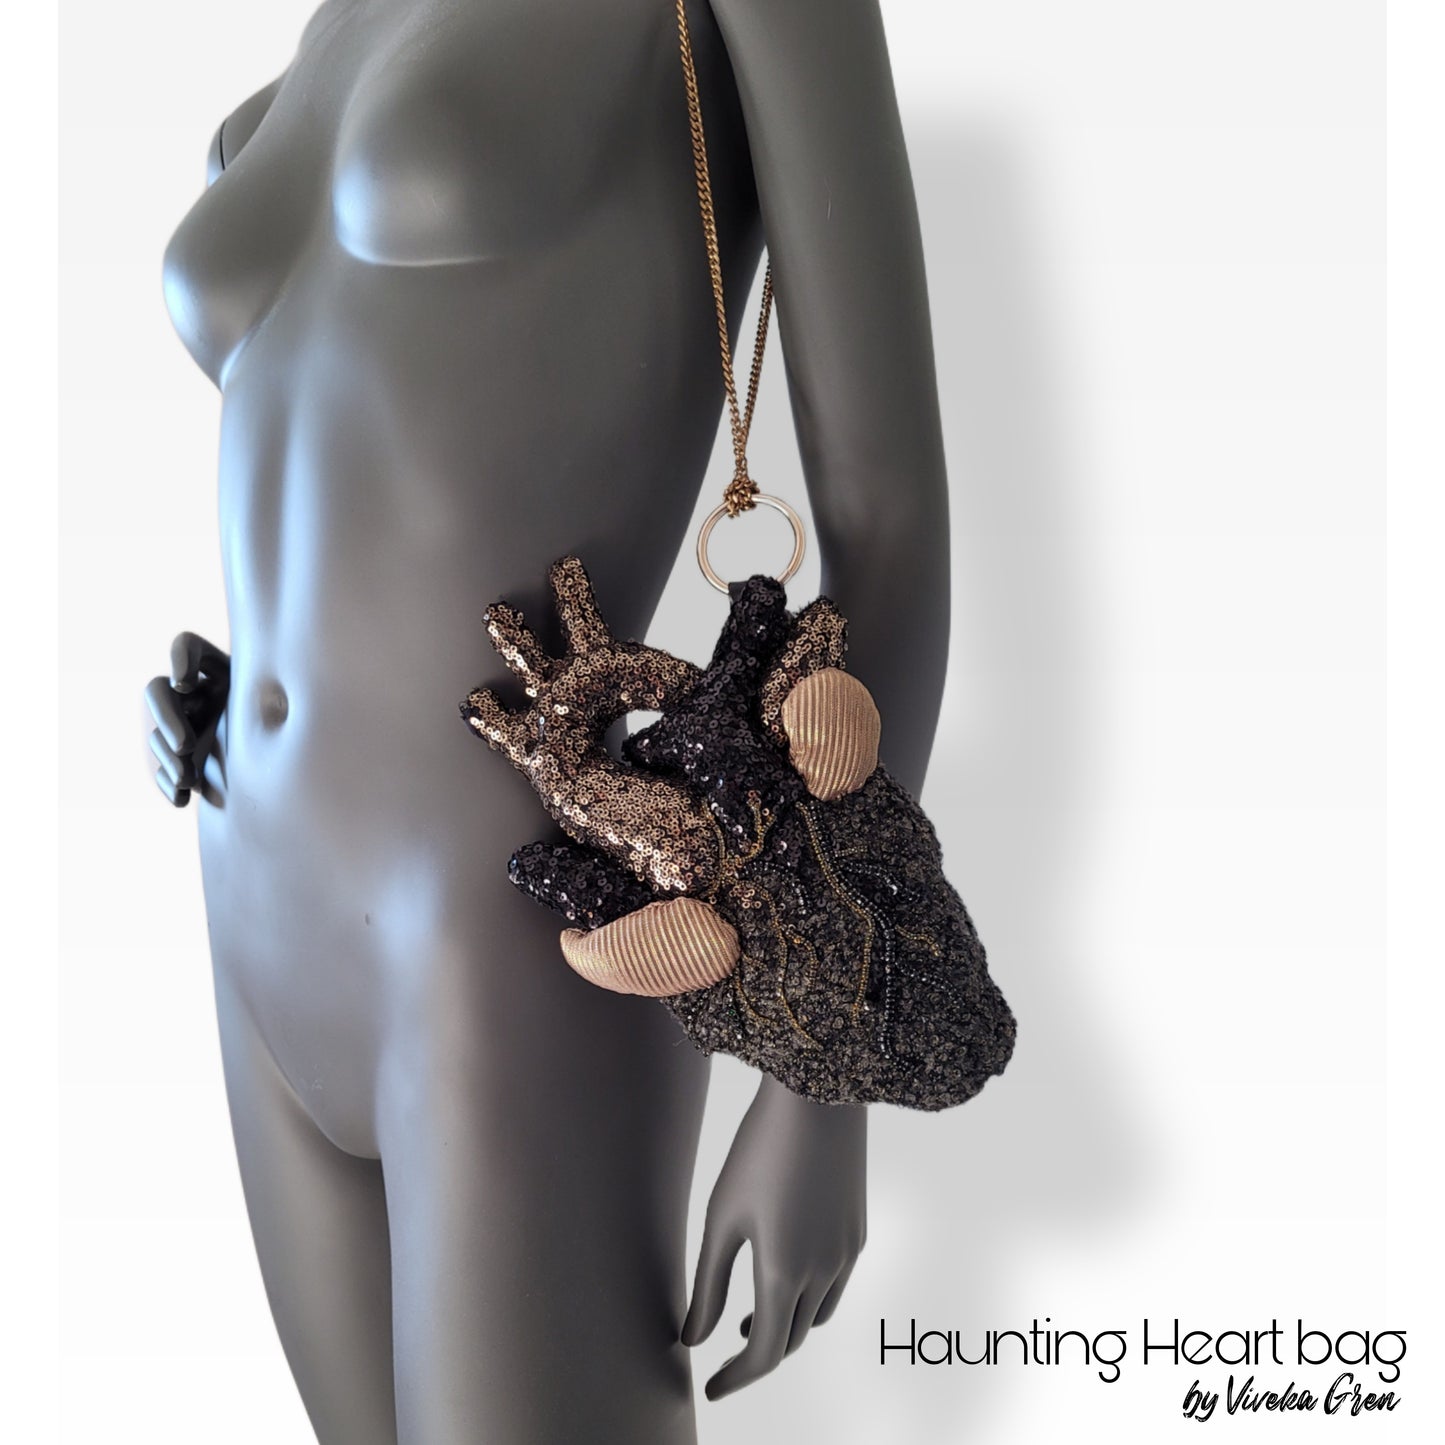 The Haunting Heart bag